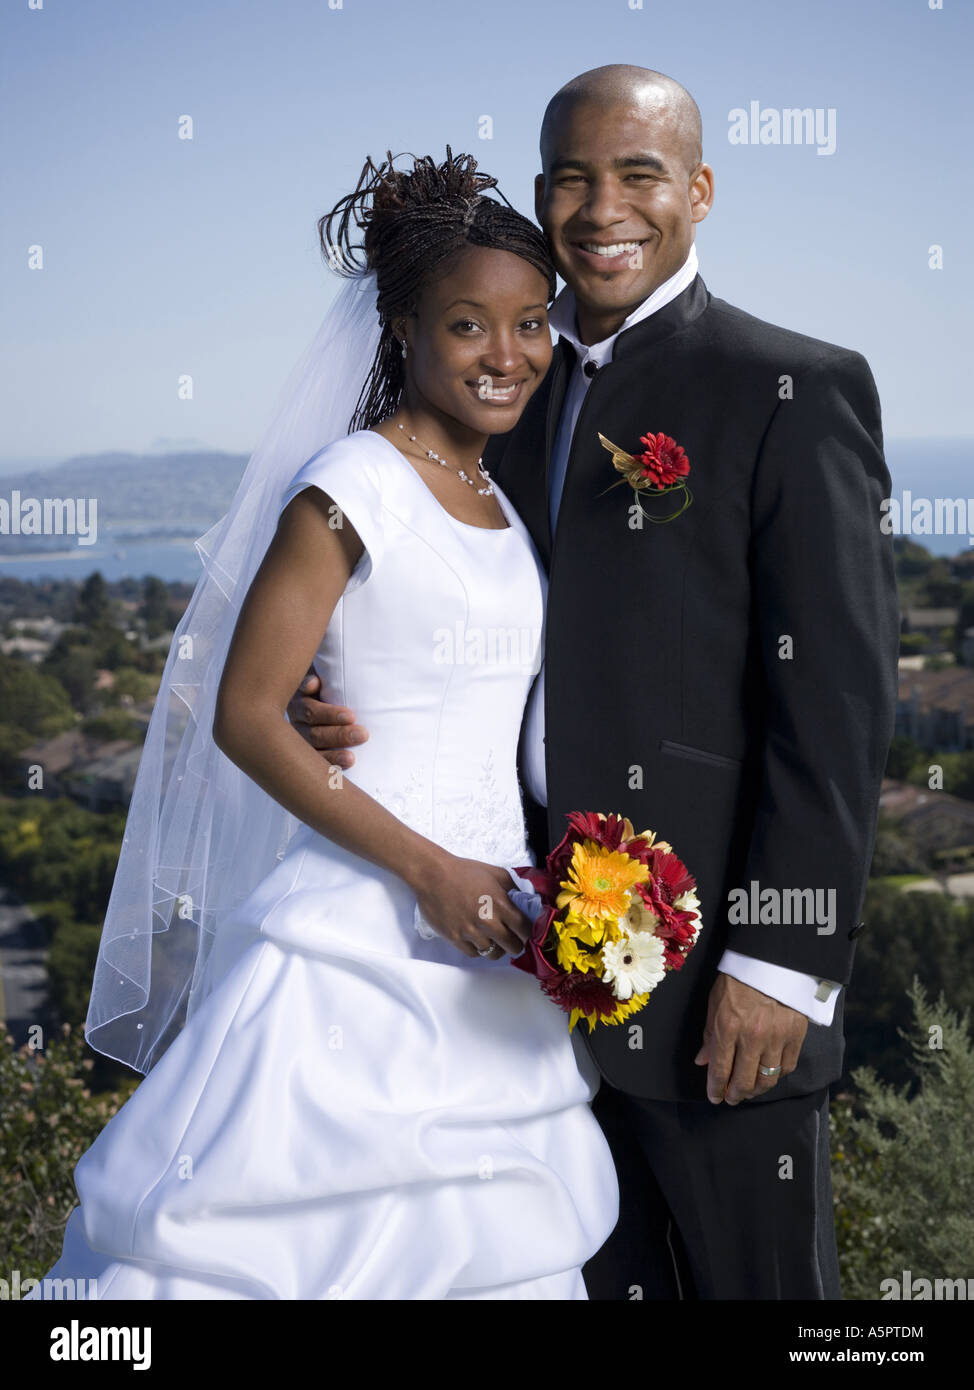 Portrait of a newlywed couple smiling together Stock Photo